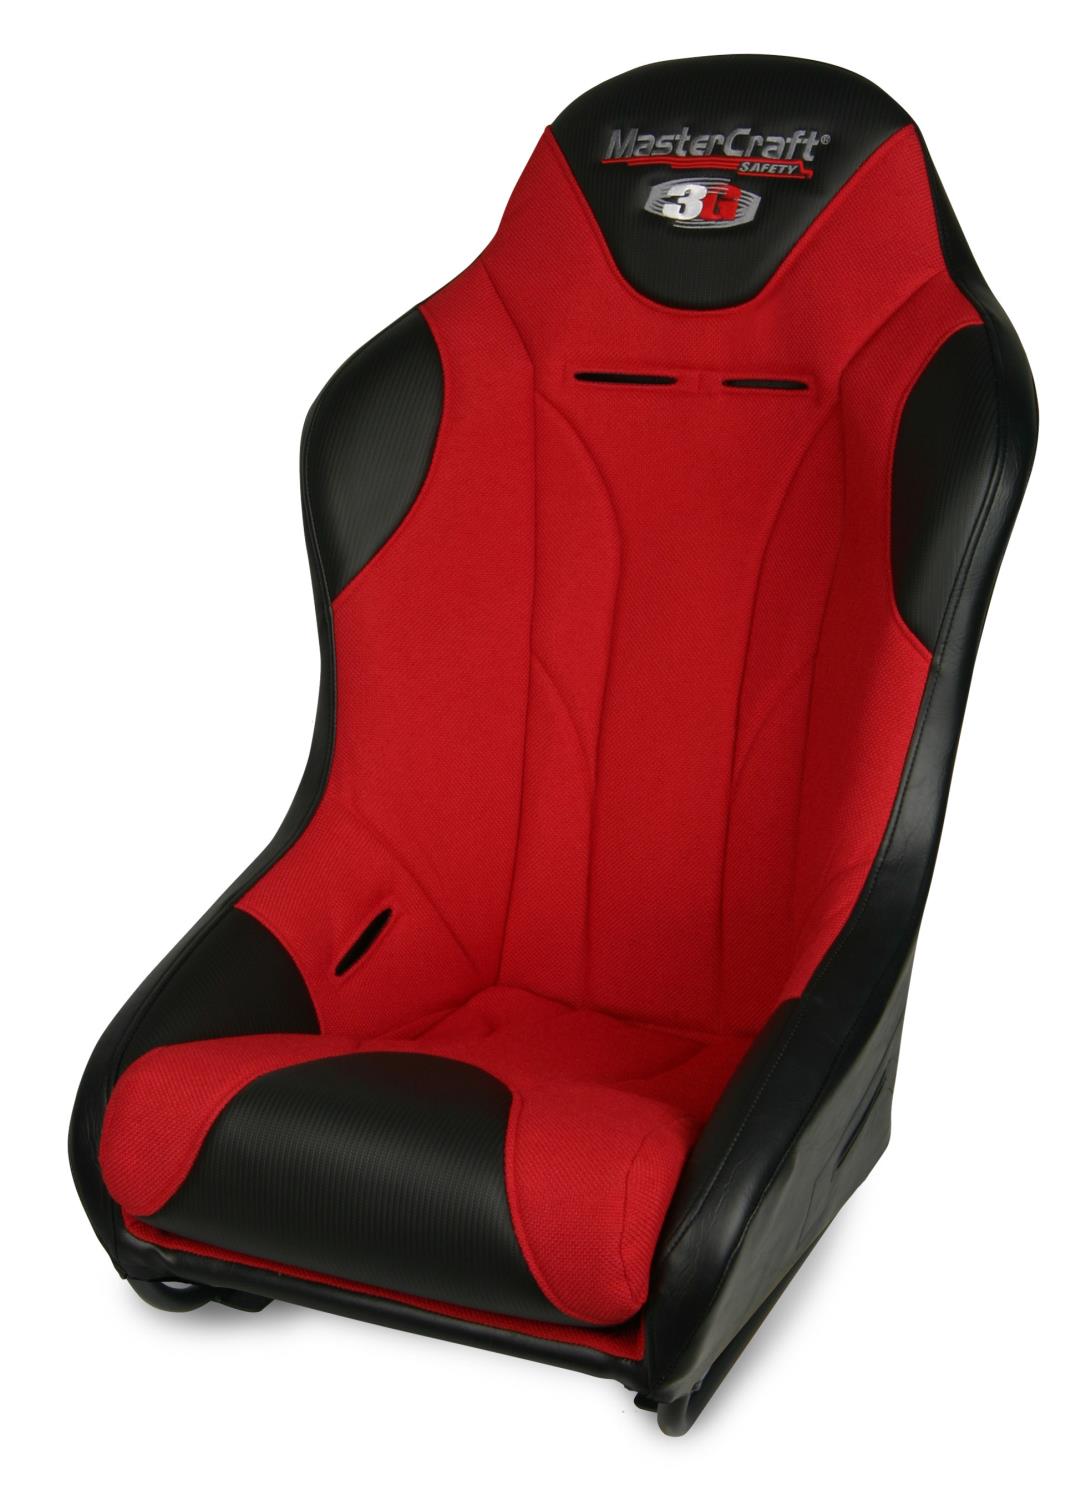 568032 2 in. WIDER 3G Seat w/DirtSport Stitch Pattern, Black with Red Fabric Center and Red Side Panels, Black Band